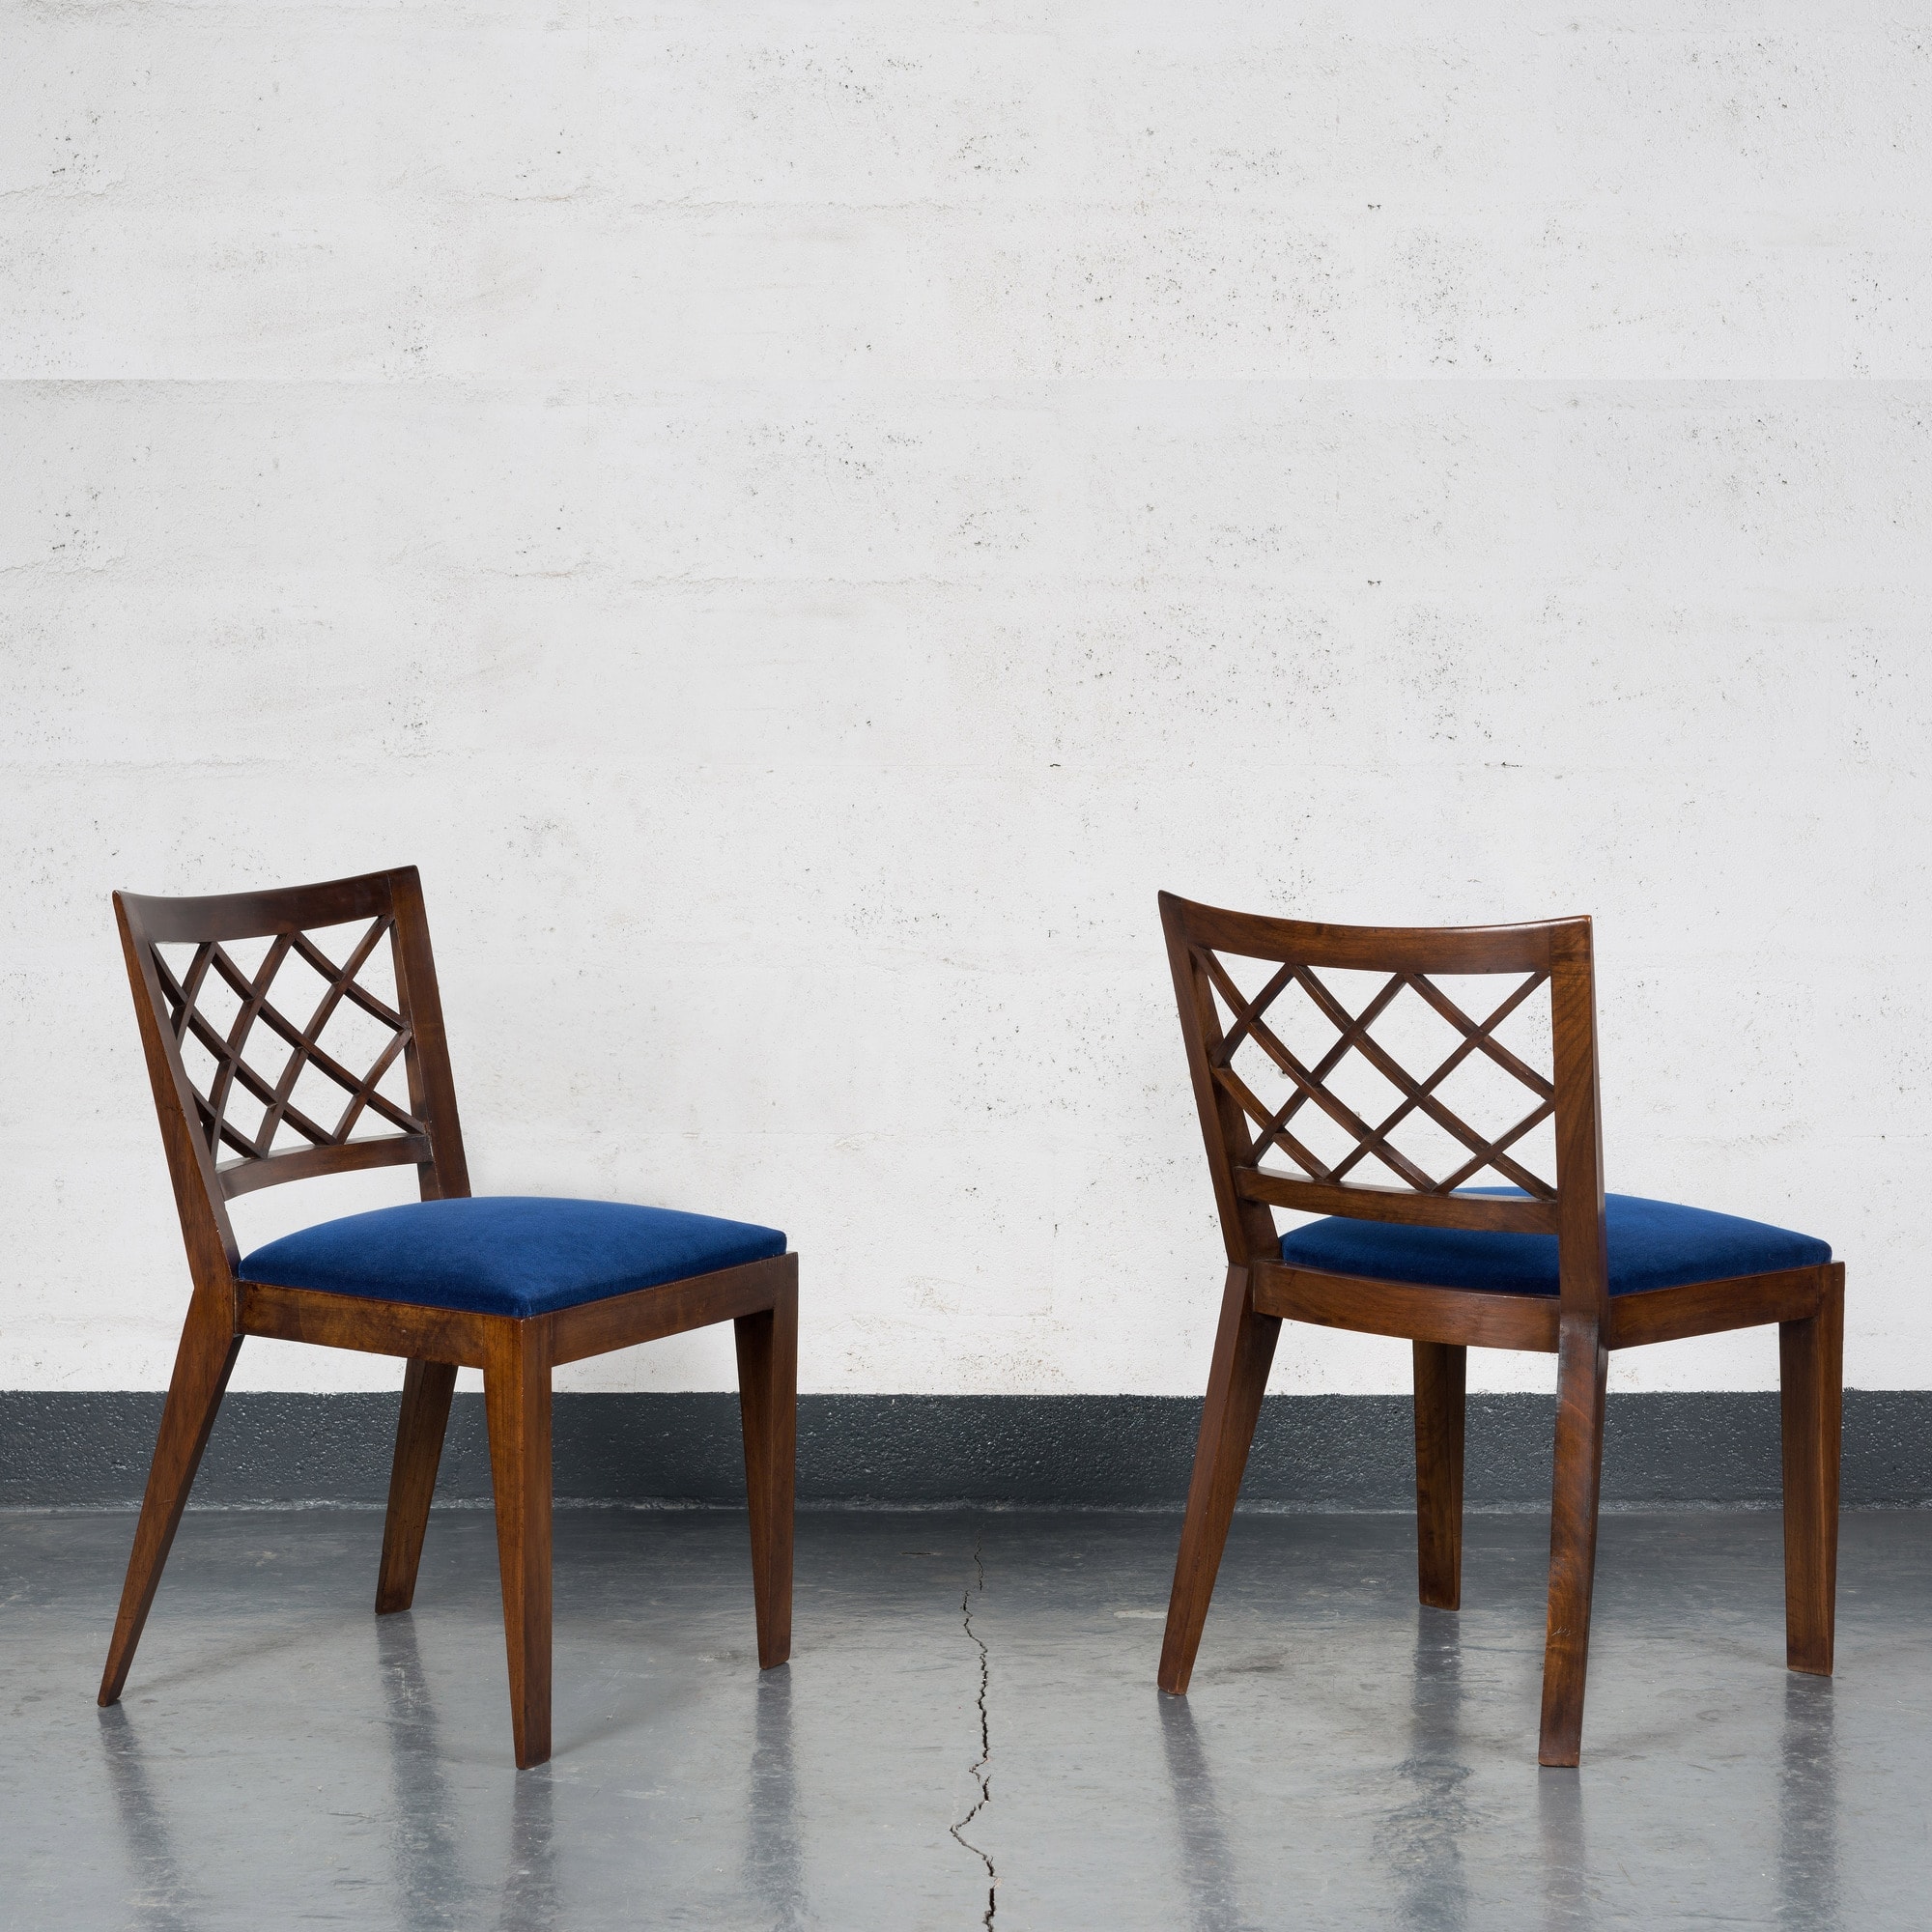 Jean Royère, Pair of “Croisillons” chairs, vue 01